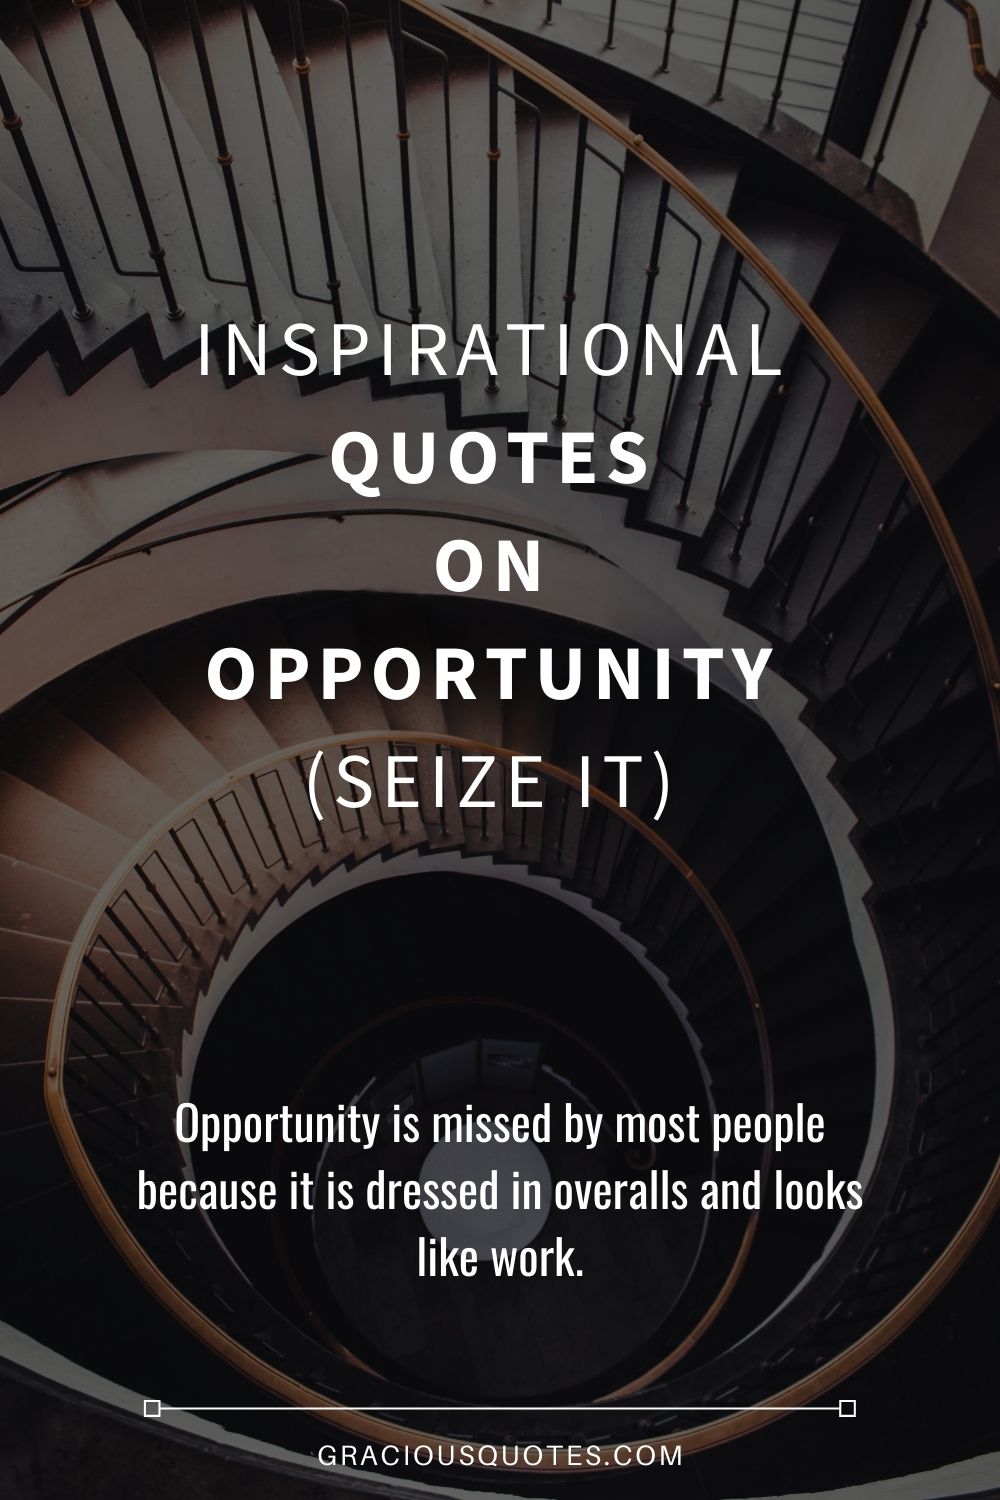 Inspirational Quotes on Opportunity (SEIZE IT) - Gracious Quotes